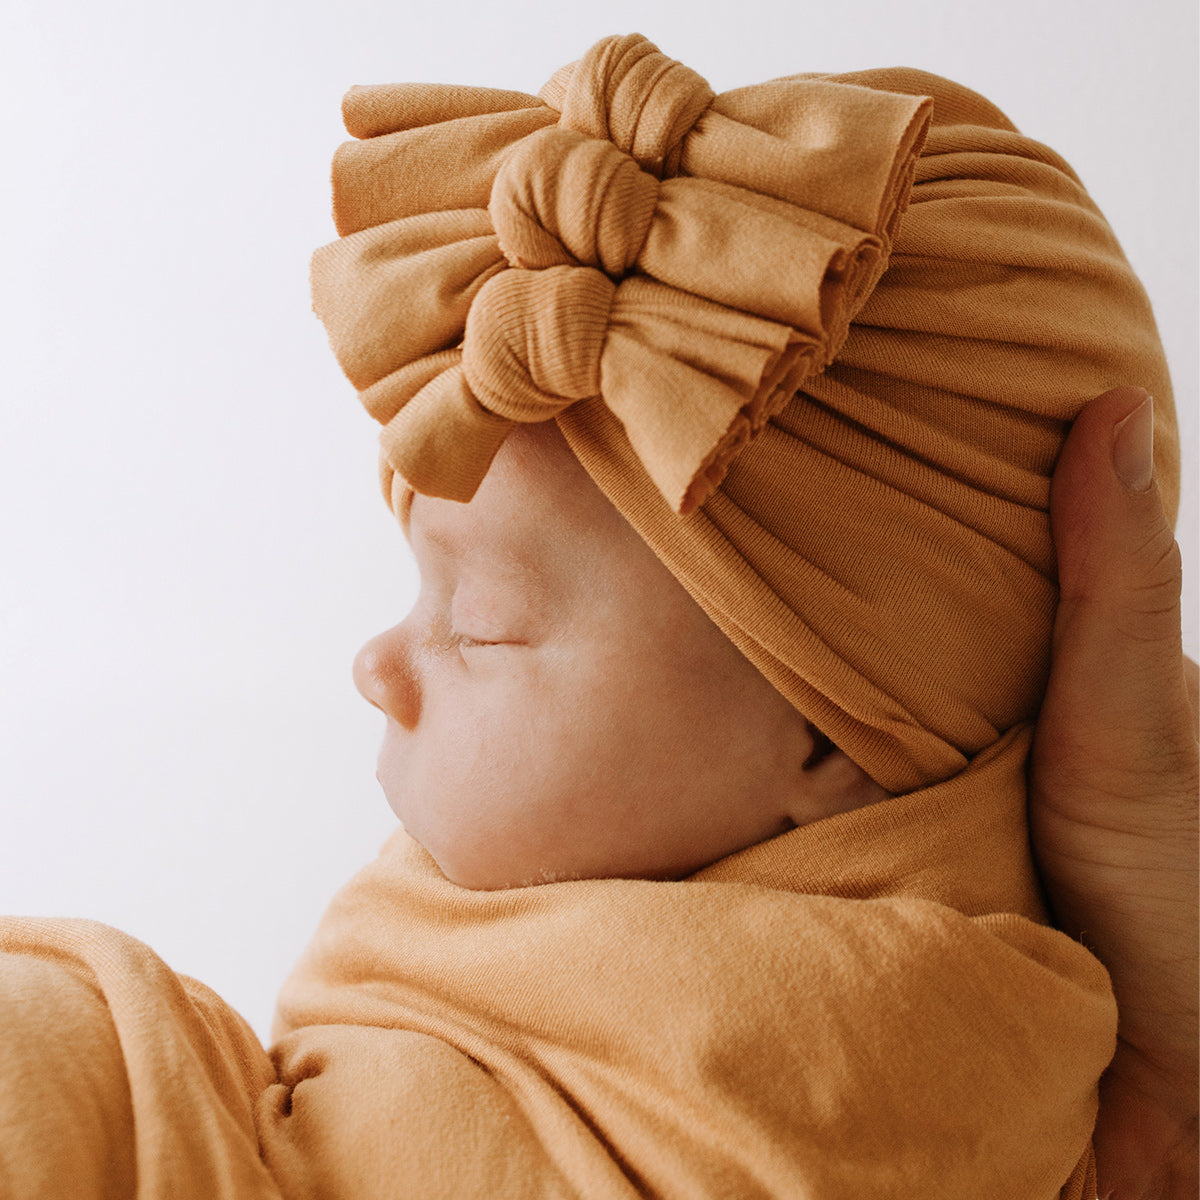 Baby being held wearing 3 bow baby beanie